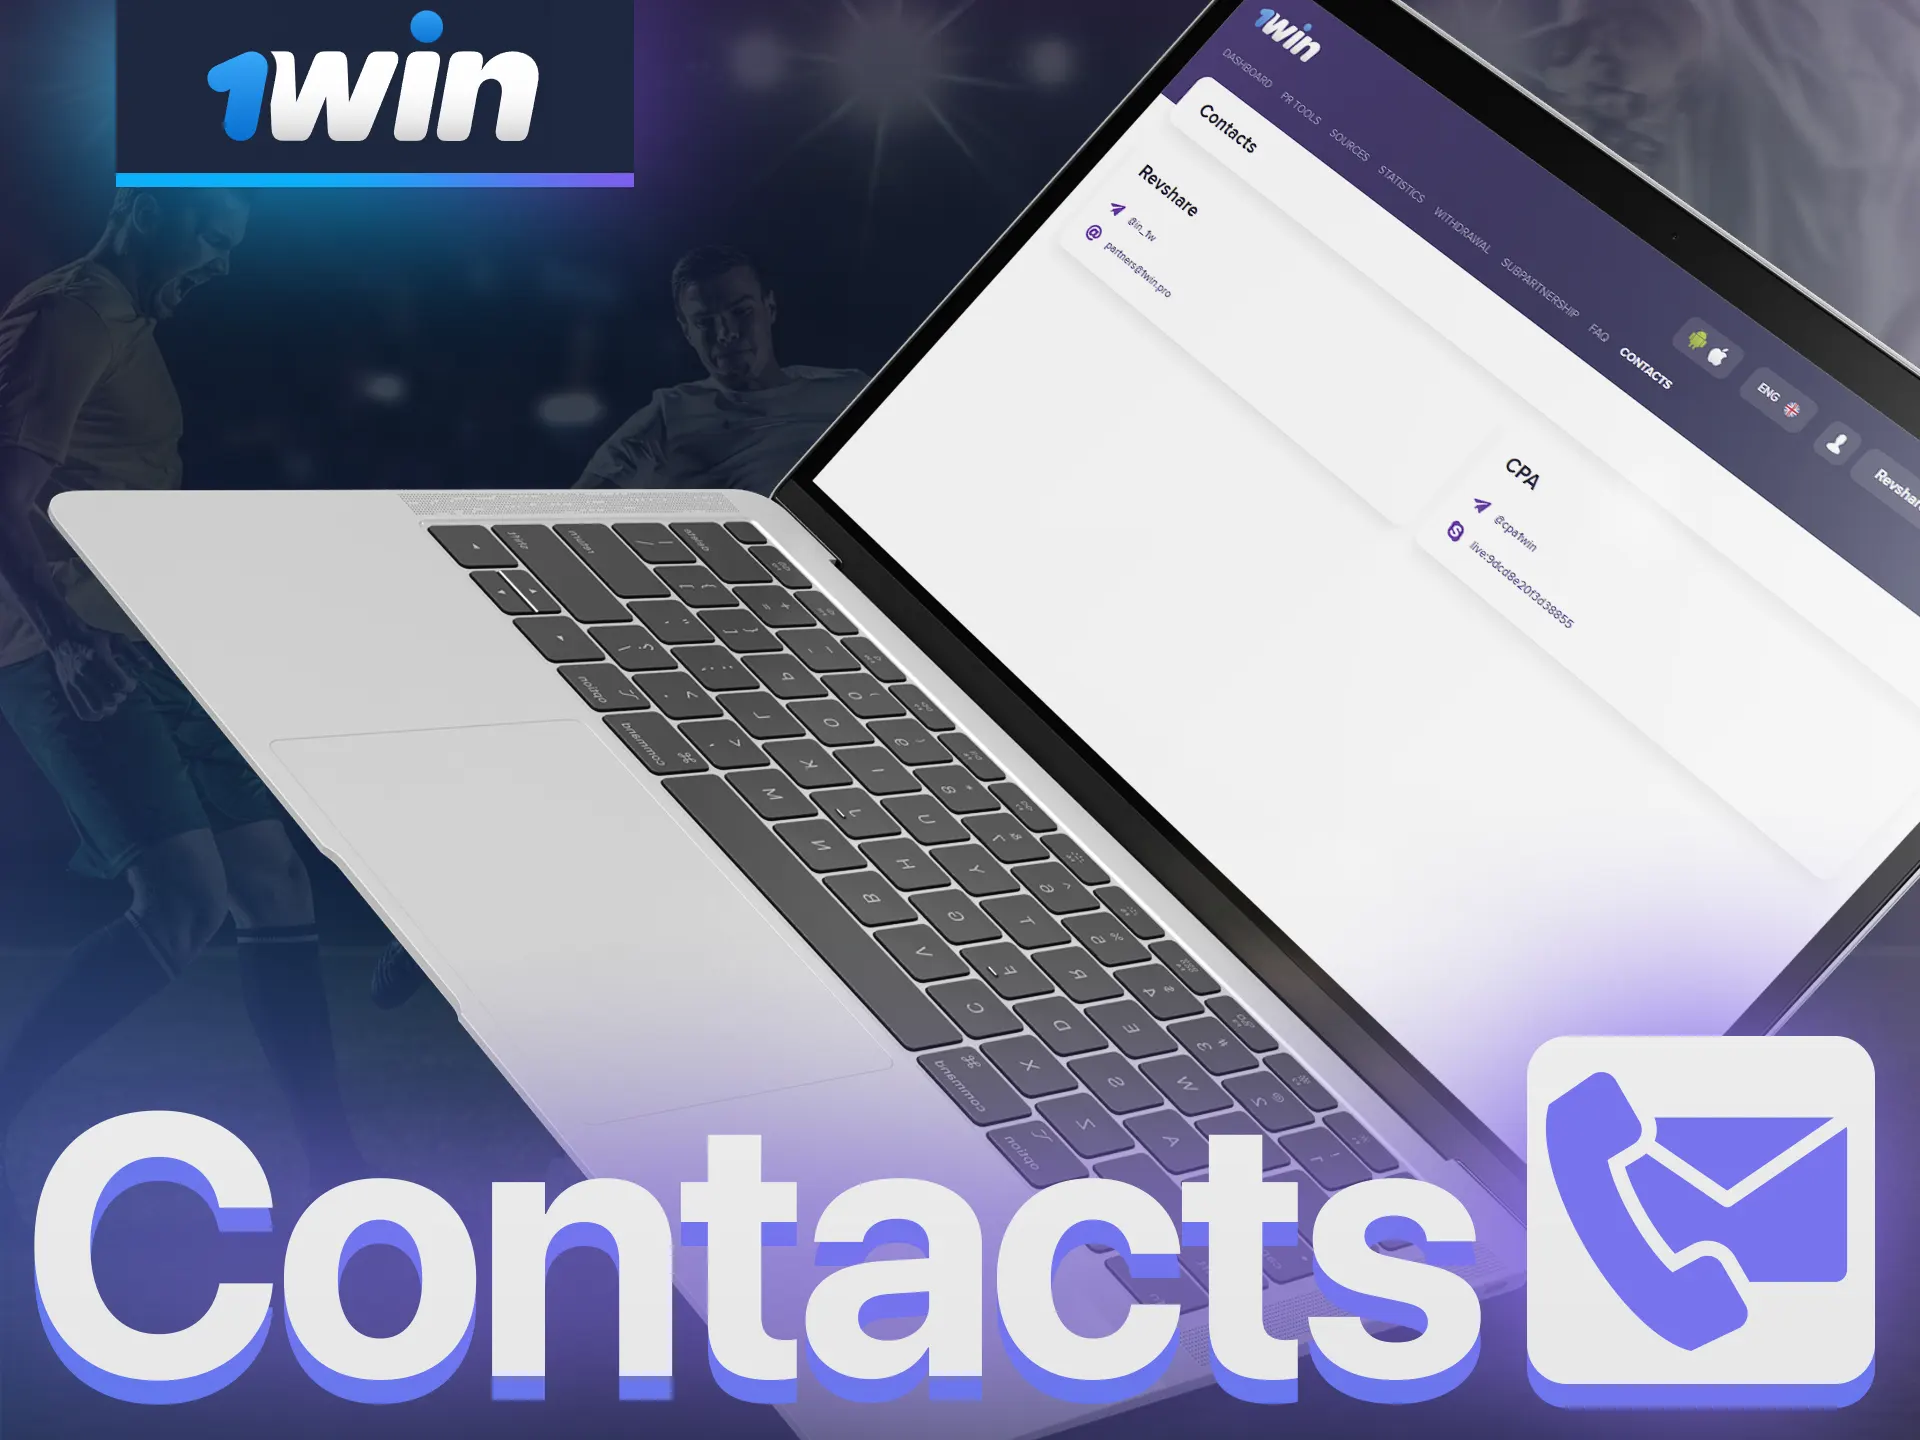 Contact 1Win partners support.